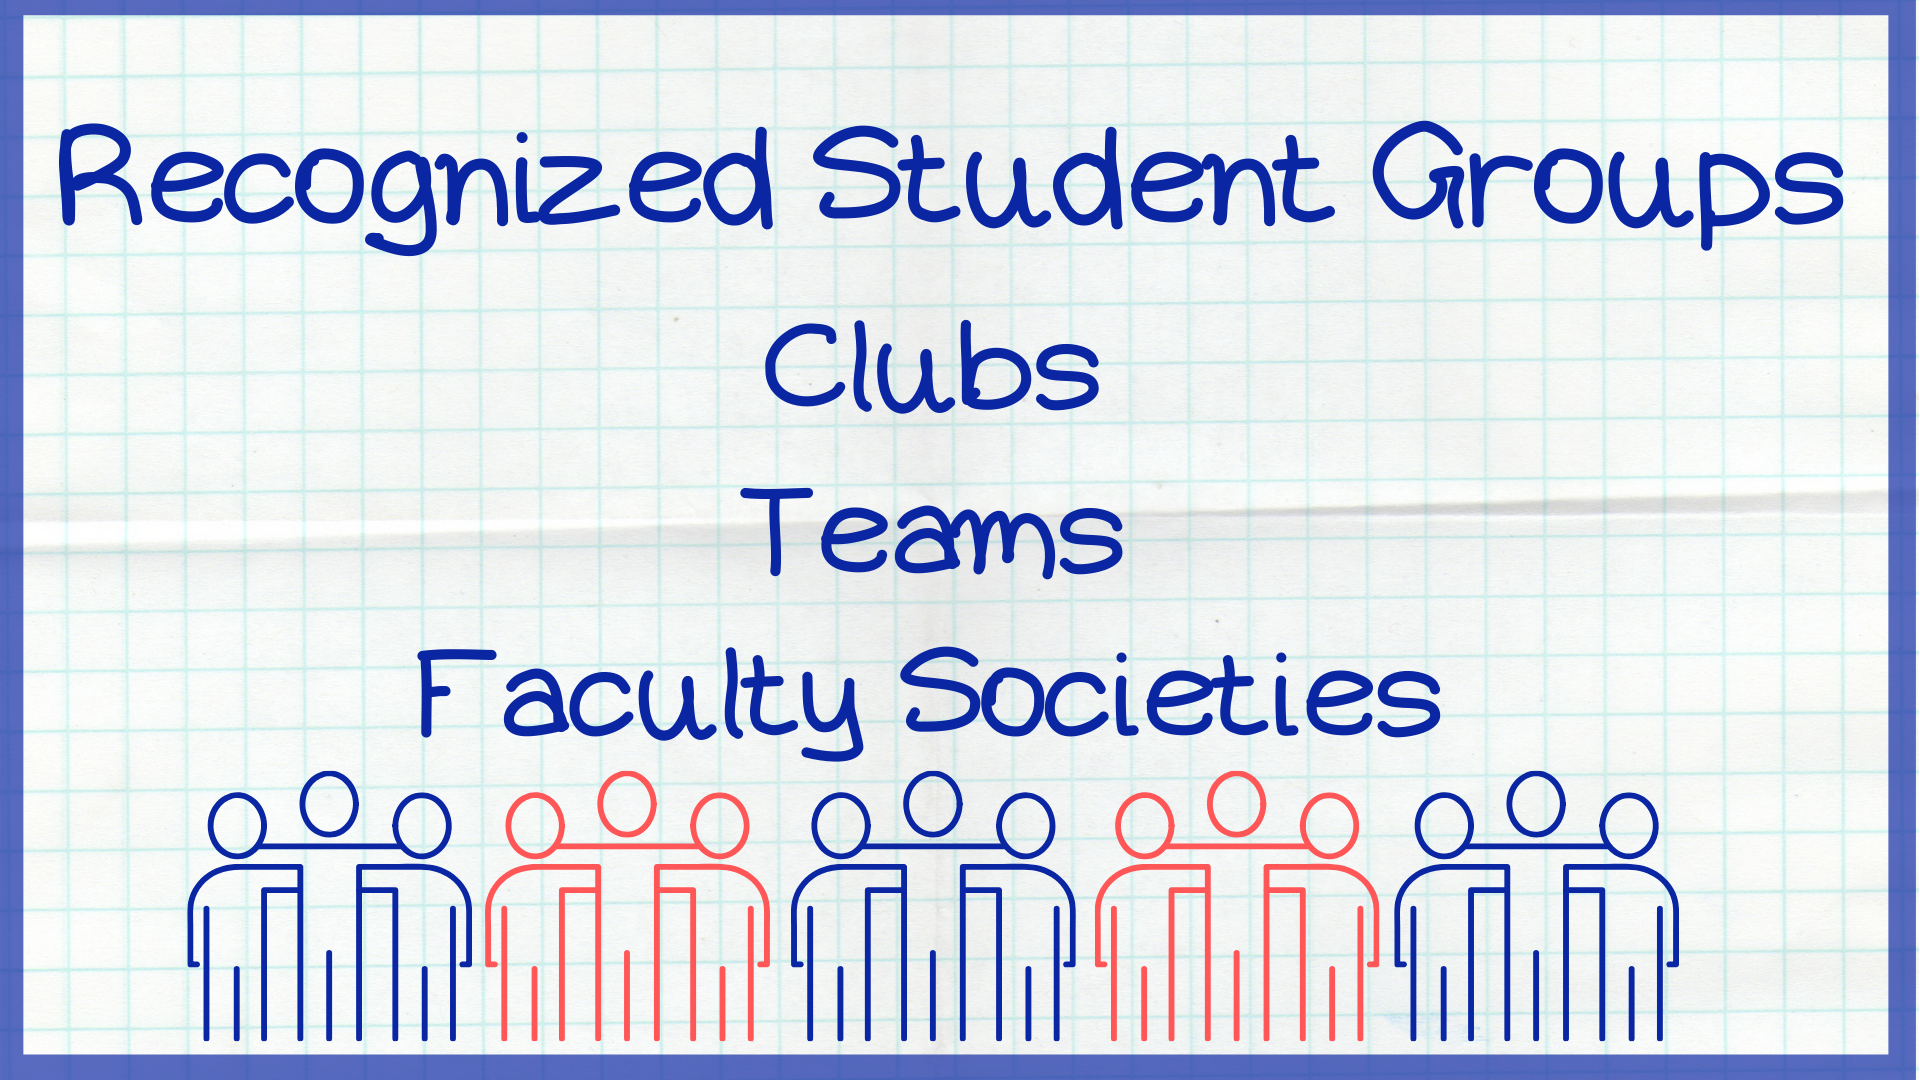 Press this button to go the the privilege form for Recognized student groups, including clubs, teams, ad faculty societies